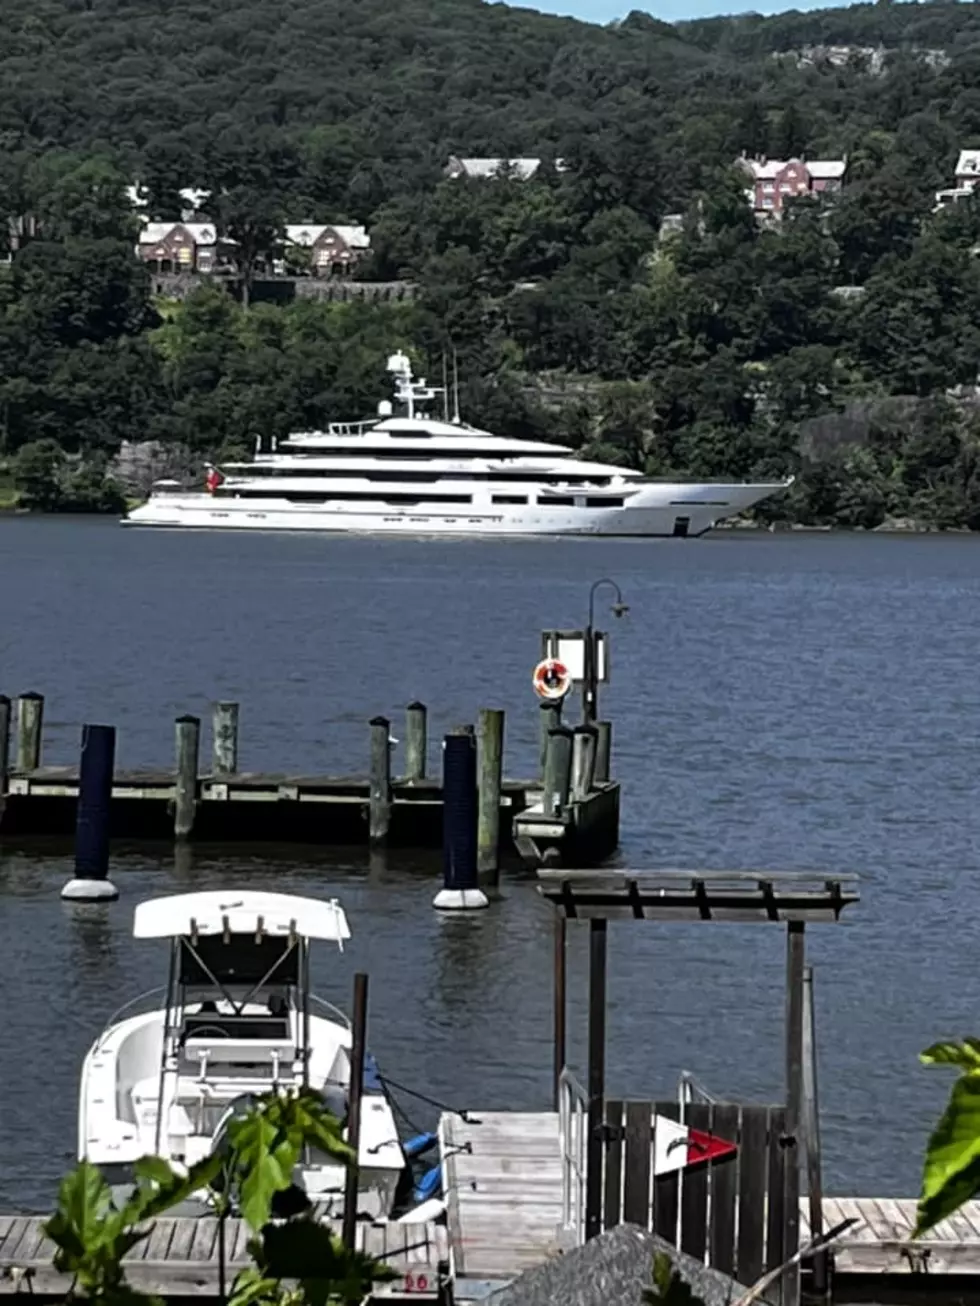 Who’s Superyacht Was This Spotted on the Hudson River?